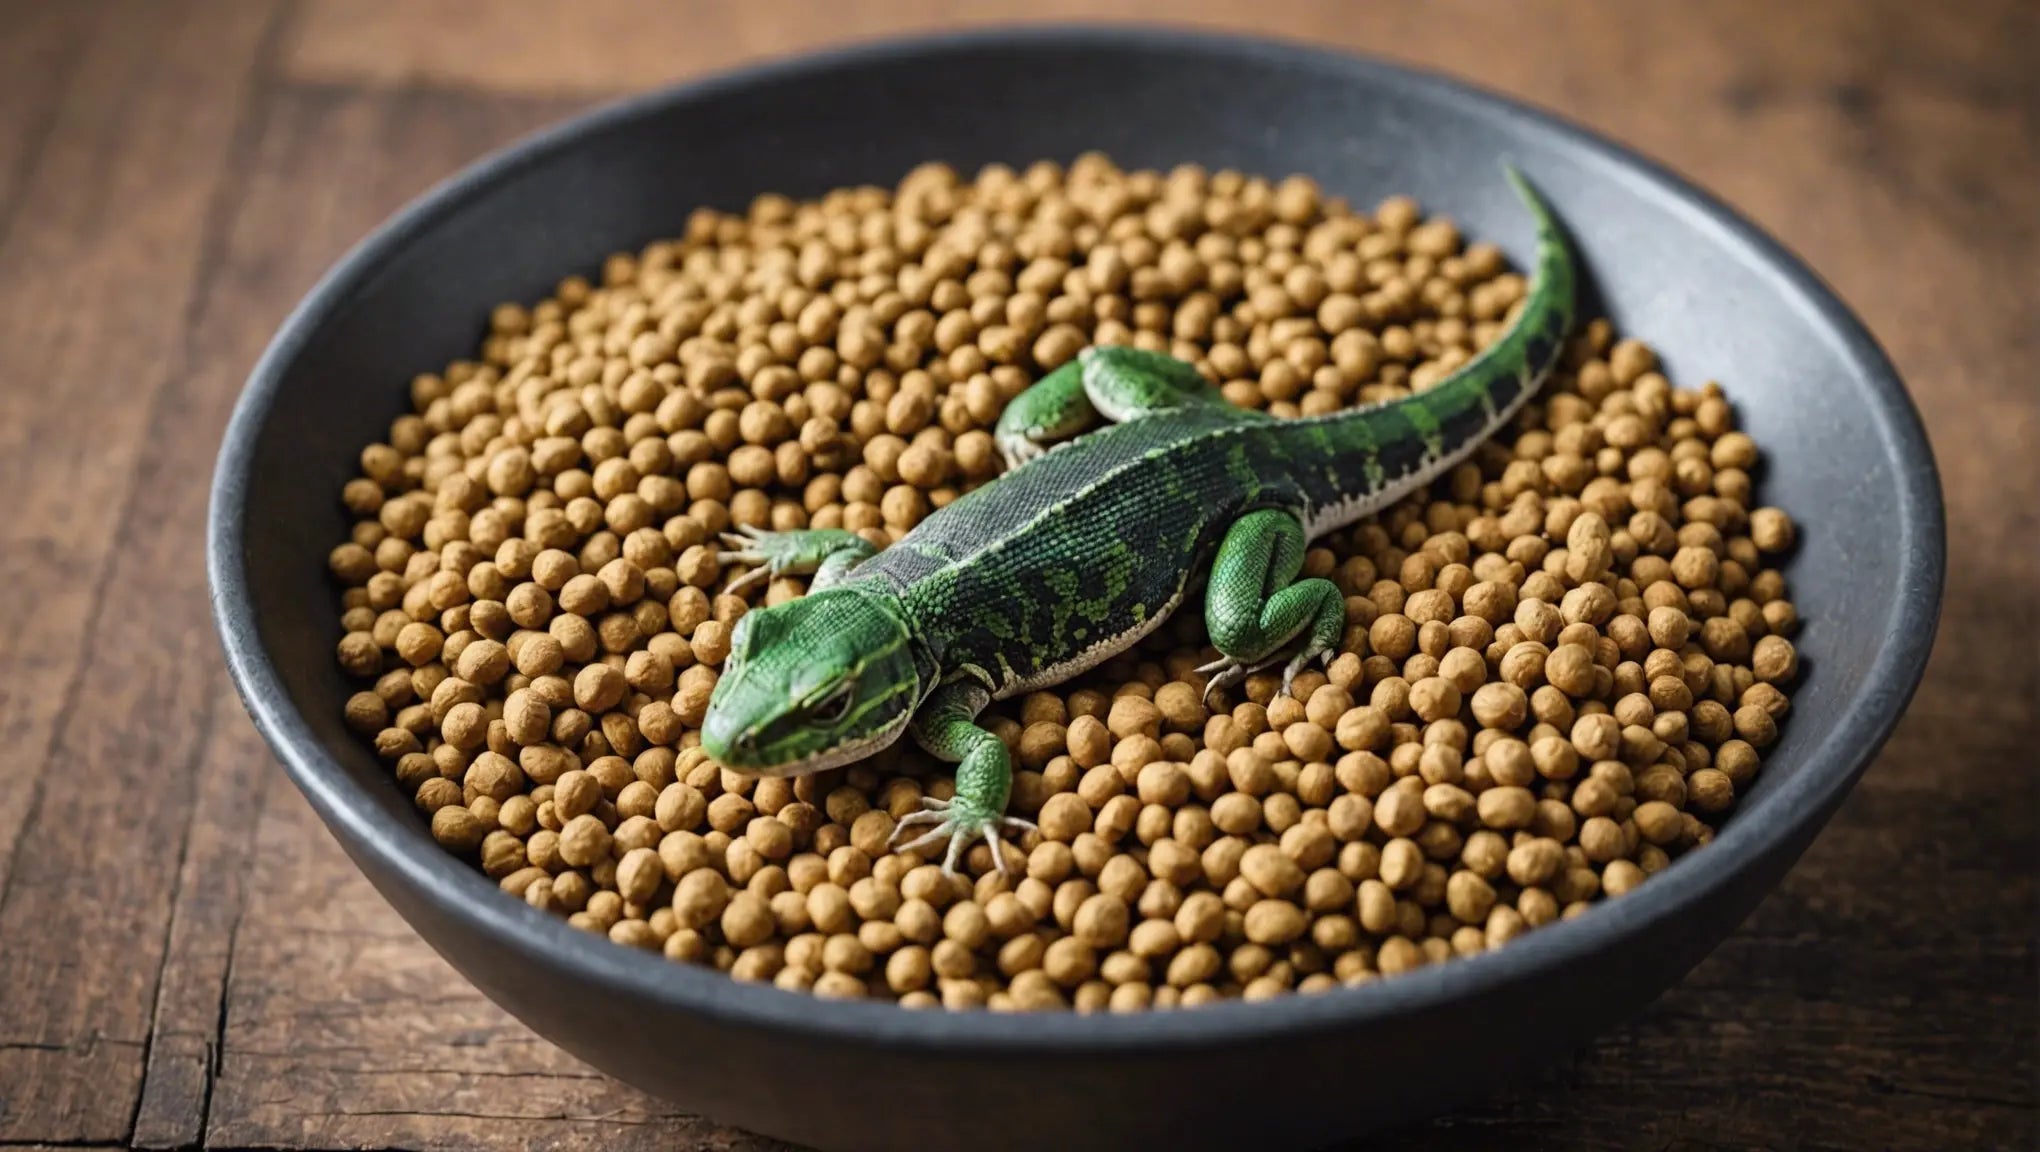 Feed Your Reptile with High-Quality Dry Food for Optimal Nutrition